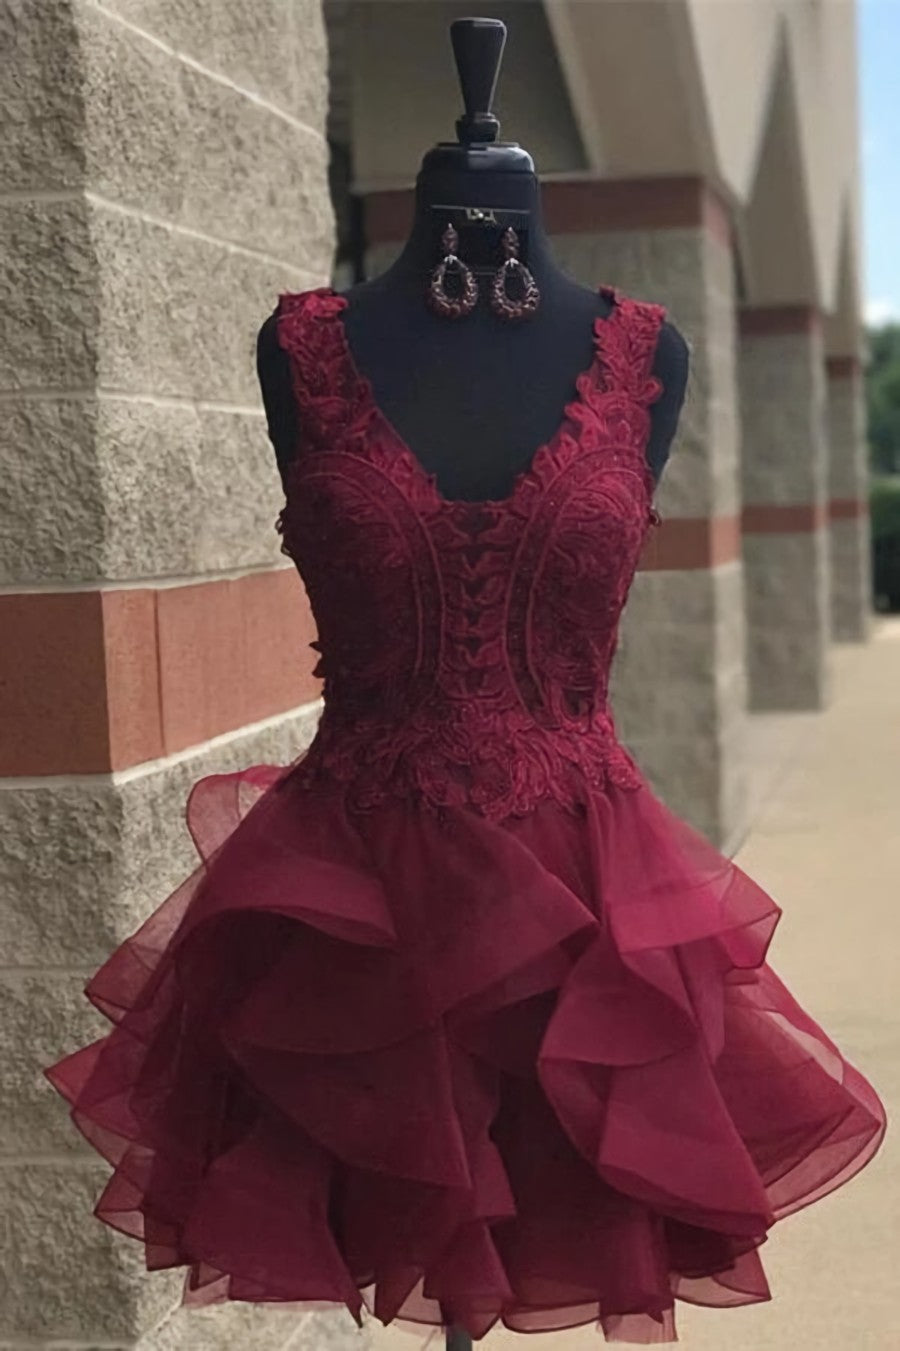 Prom Dress Gown, Princess Lace Appliques Dark Green Homecoming Dress with Flounced,Short Prom Dresses